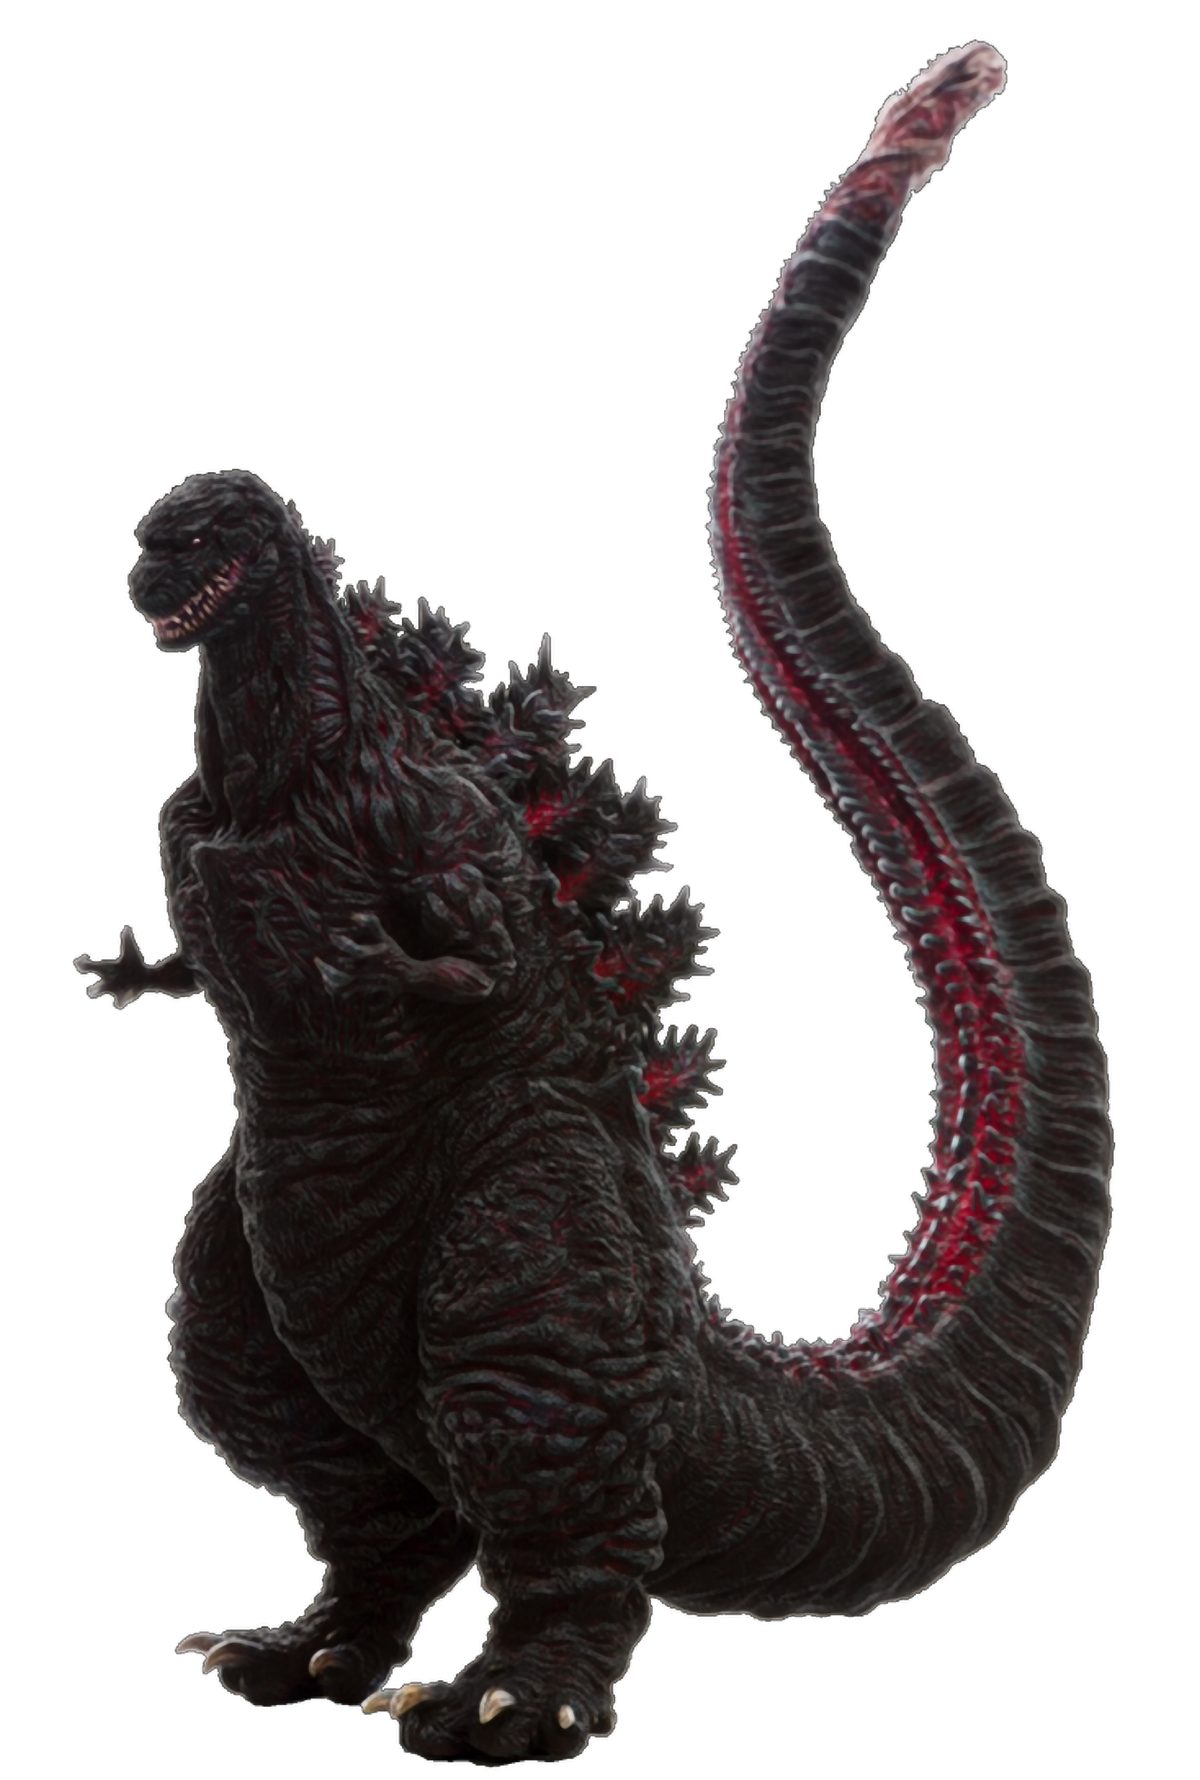 Shin Godzilla Vs Godzilla Earth (Godzilla Earth used to be his size,  actually, smaller!)